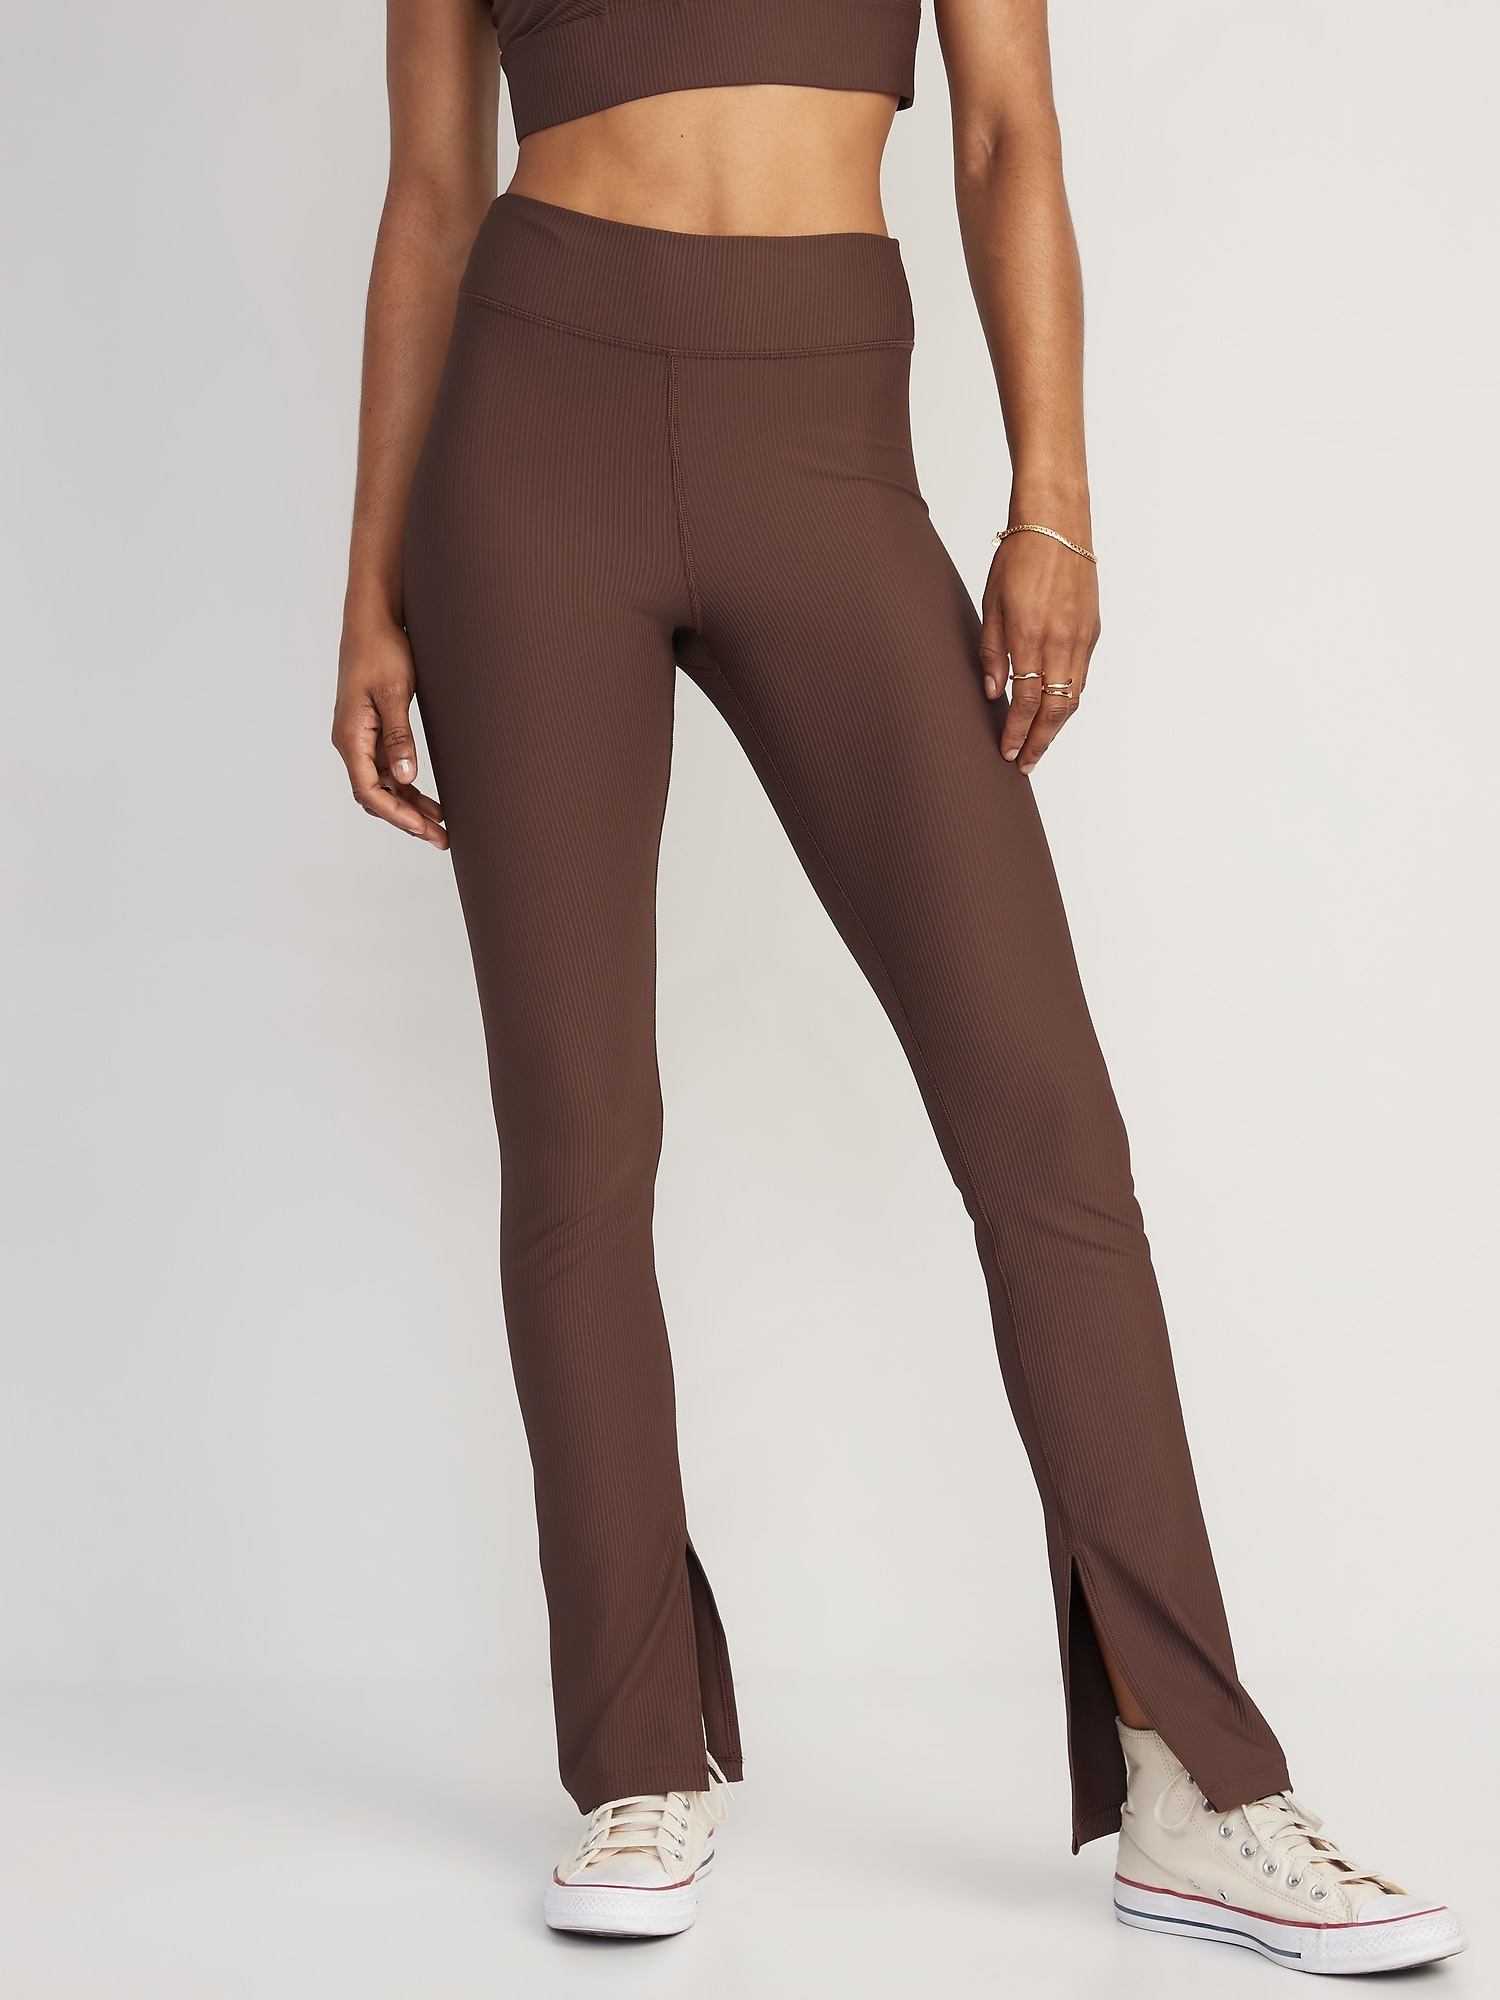 Brown Flare Leggings, Flare Tights